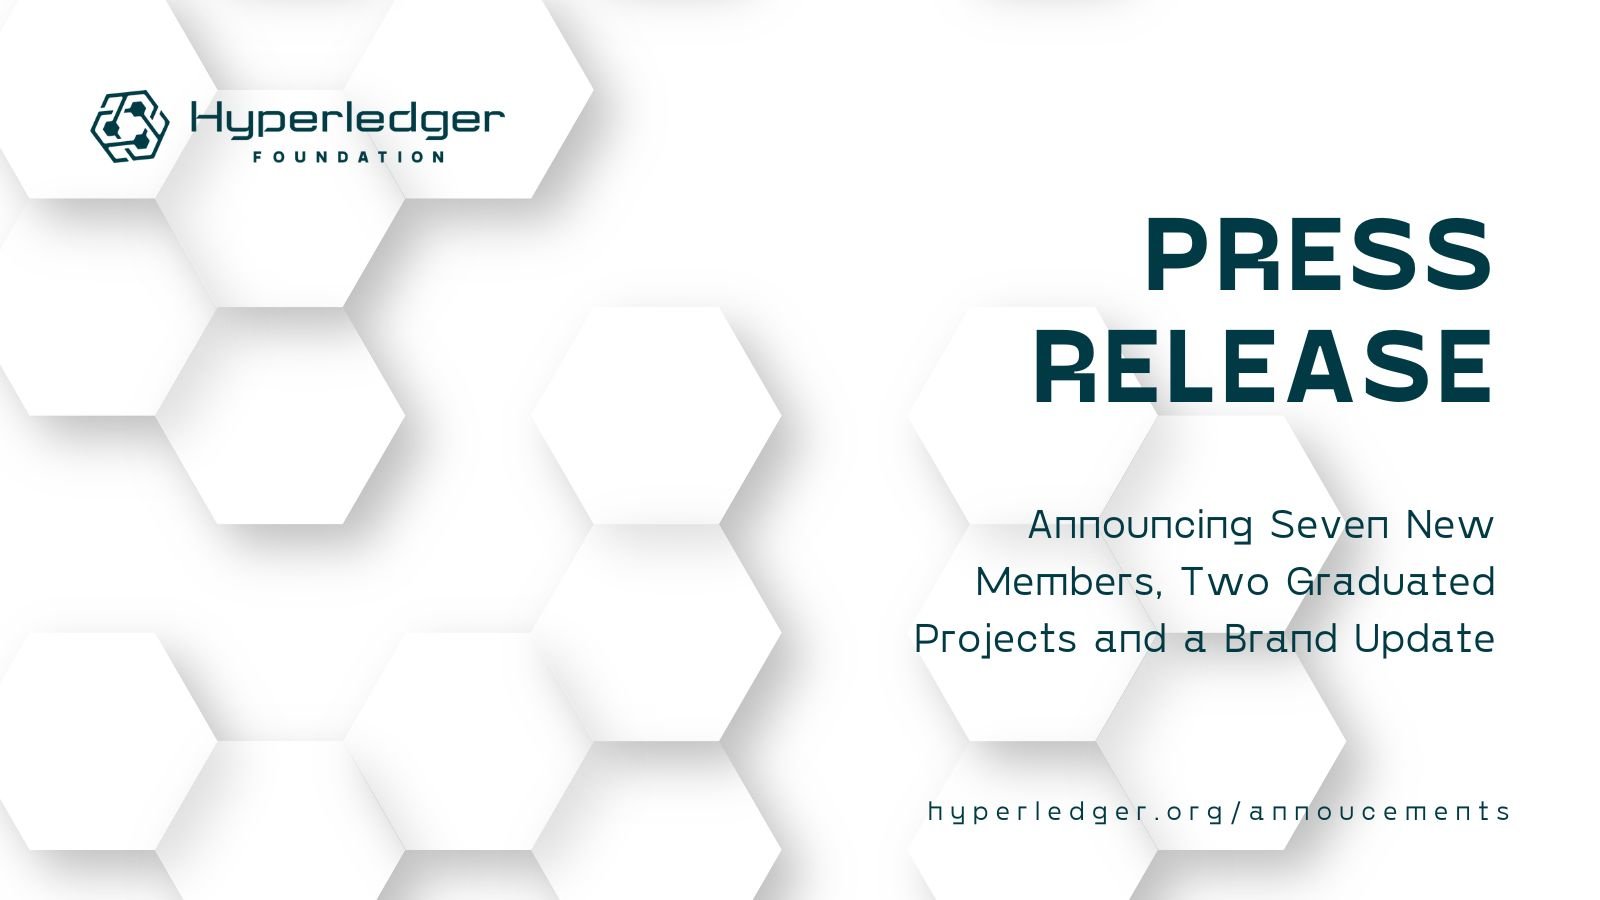 Hyperledger Foundation Adds Seven New Members; Moves Two Projects to Graduated Status